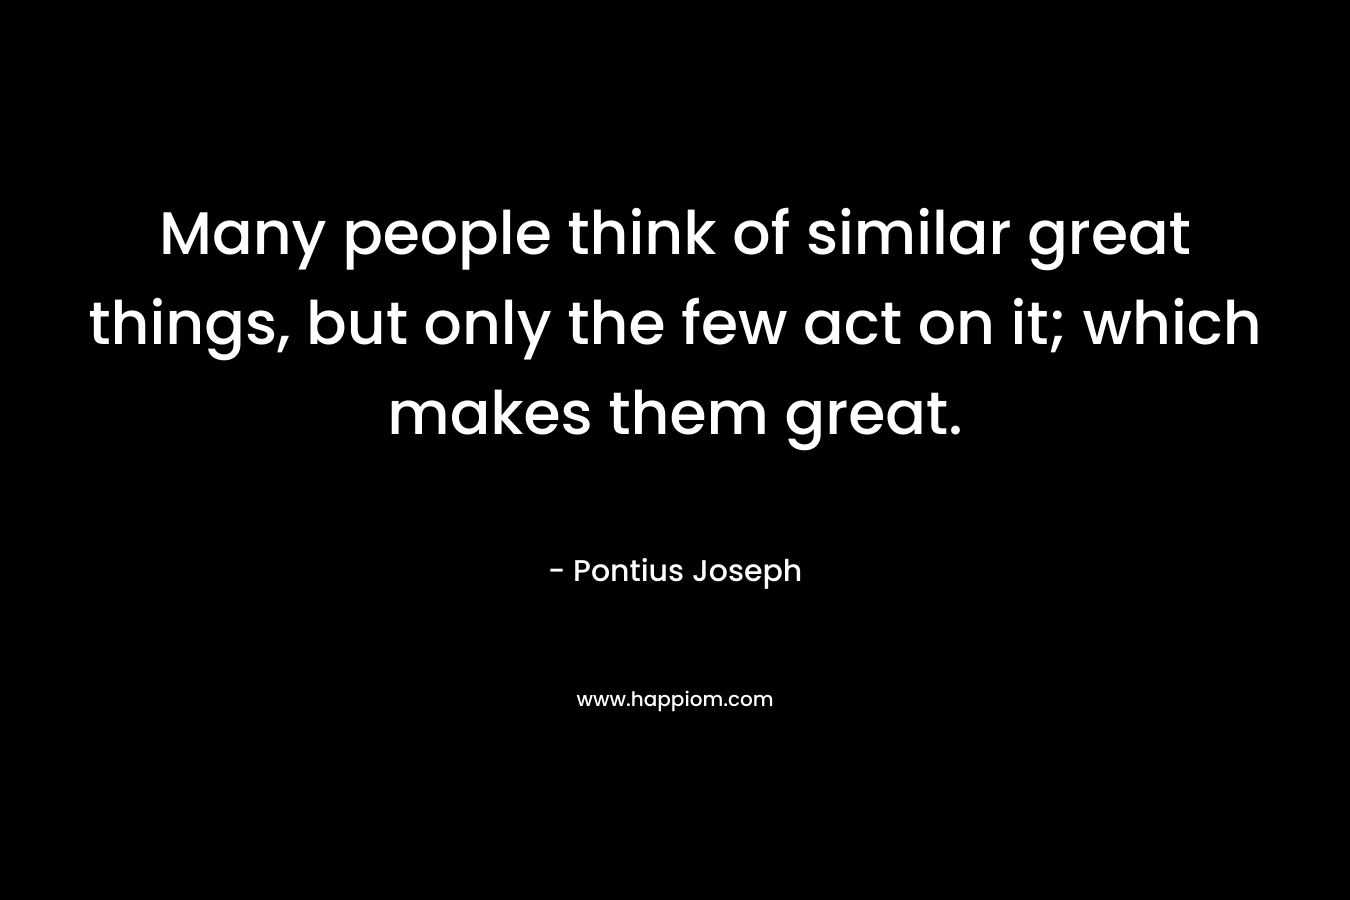 Many people think of similar great things, but only the few act on it; which makes them great.